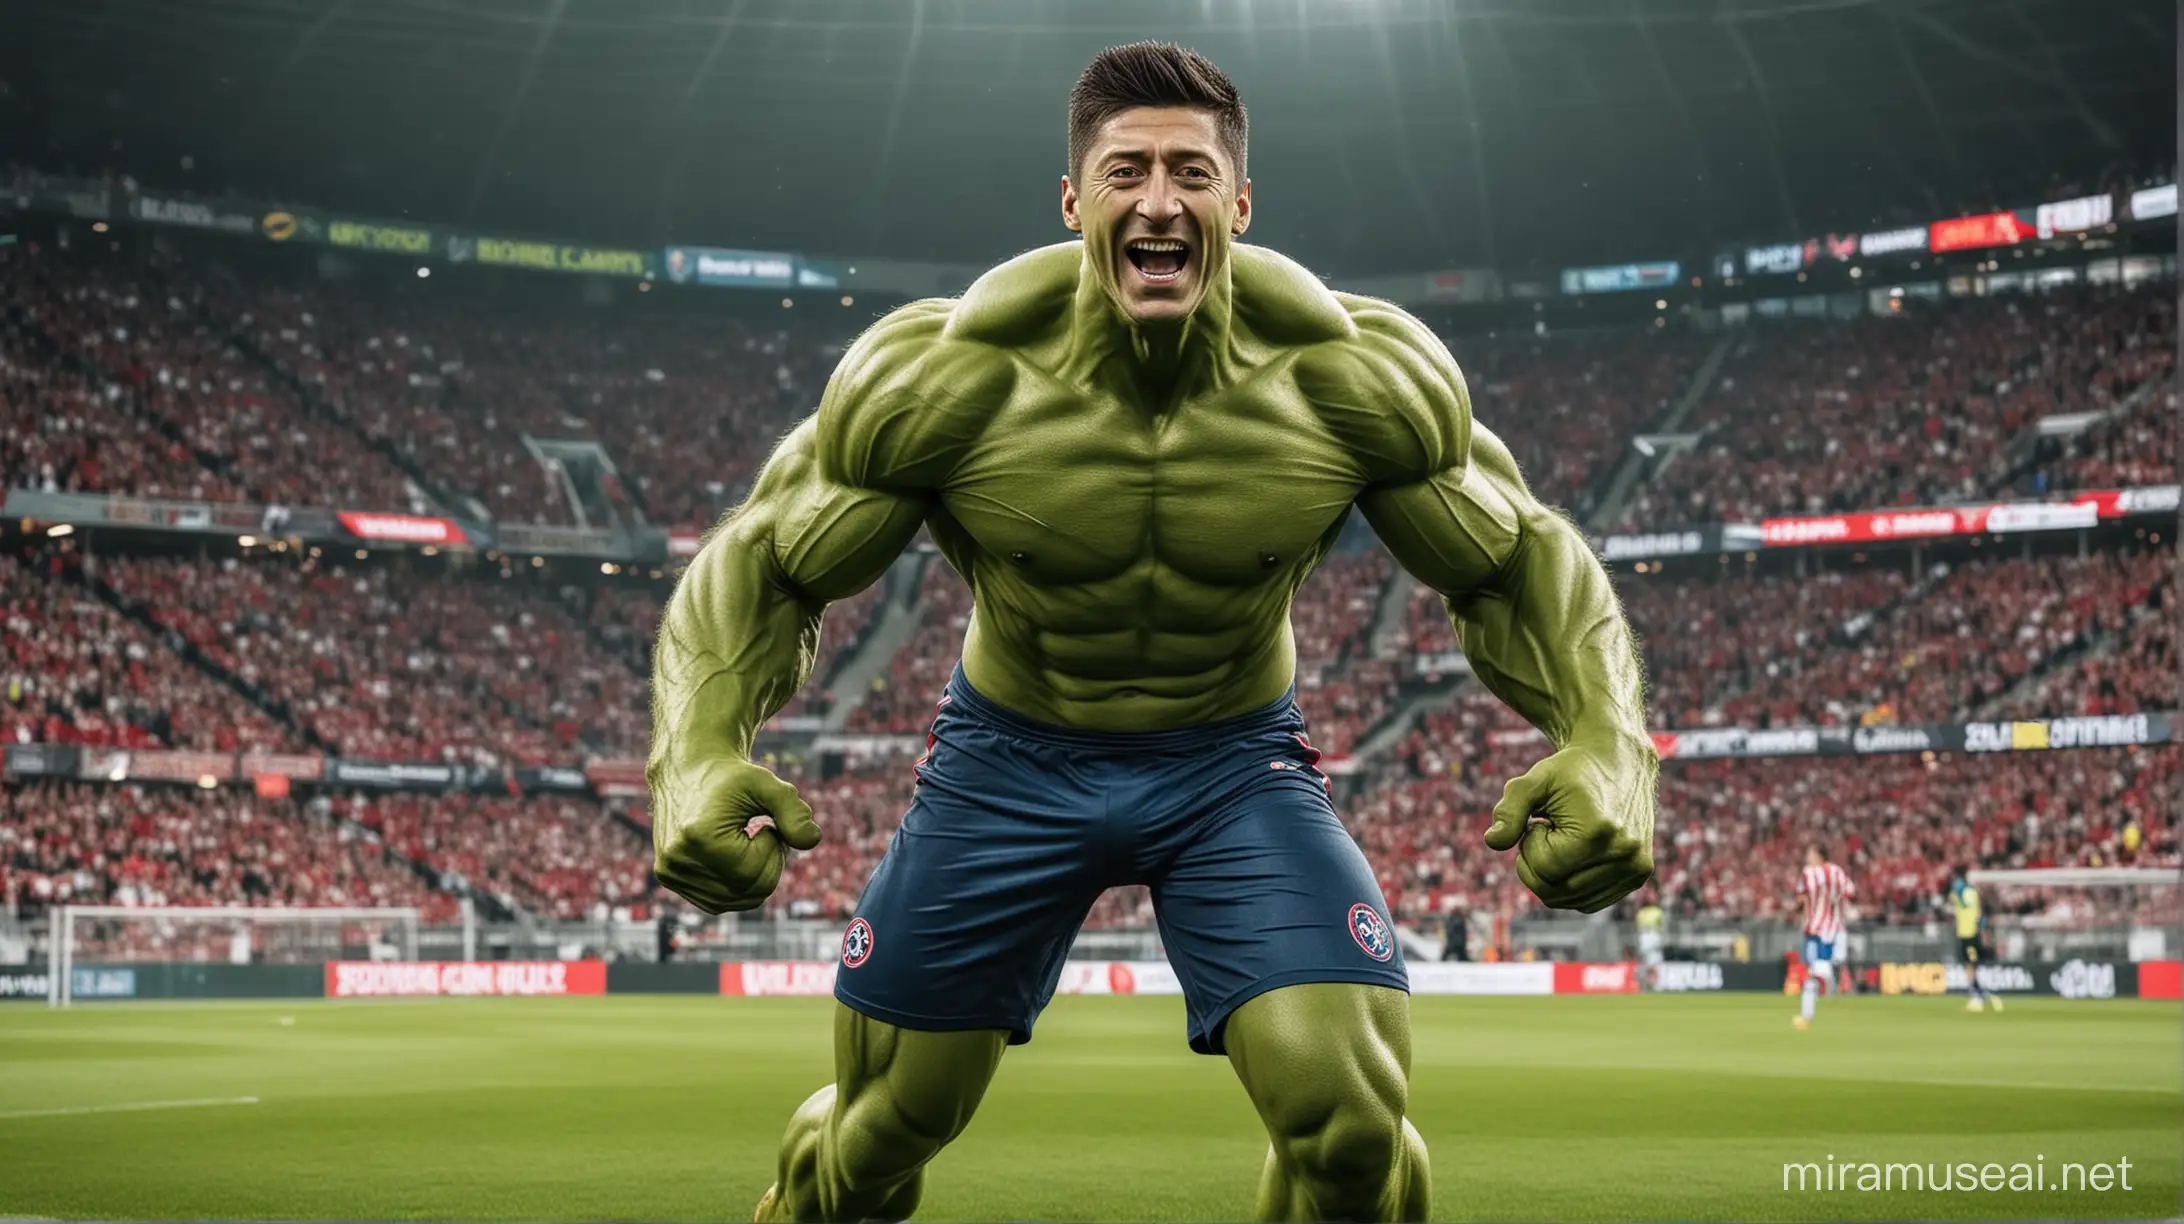 Robert Lewandowski the Soccer player transformes into the comic book superhero Hulk, full body, looking Directly at the Camera, Super Smiley Face, Standing in the football field.
